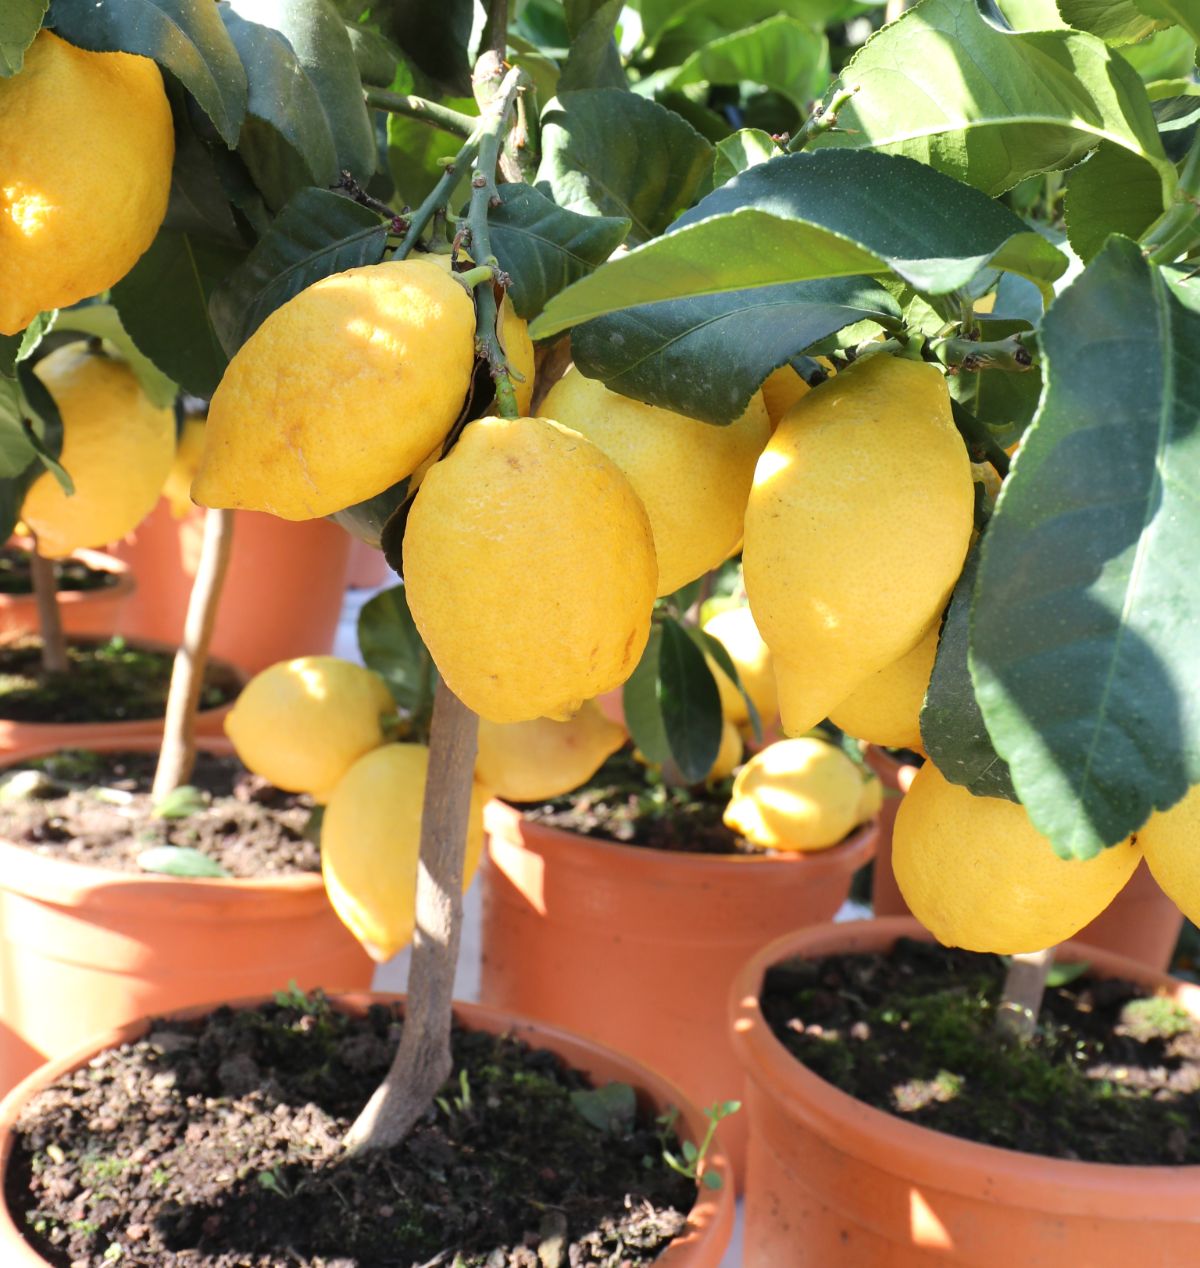 2 Lemons - 28 Amazing Plants That Thrive Growing in Buckets